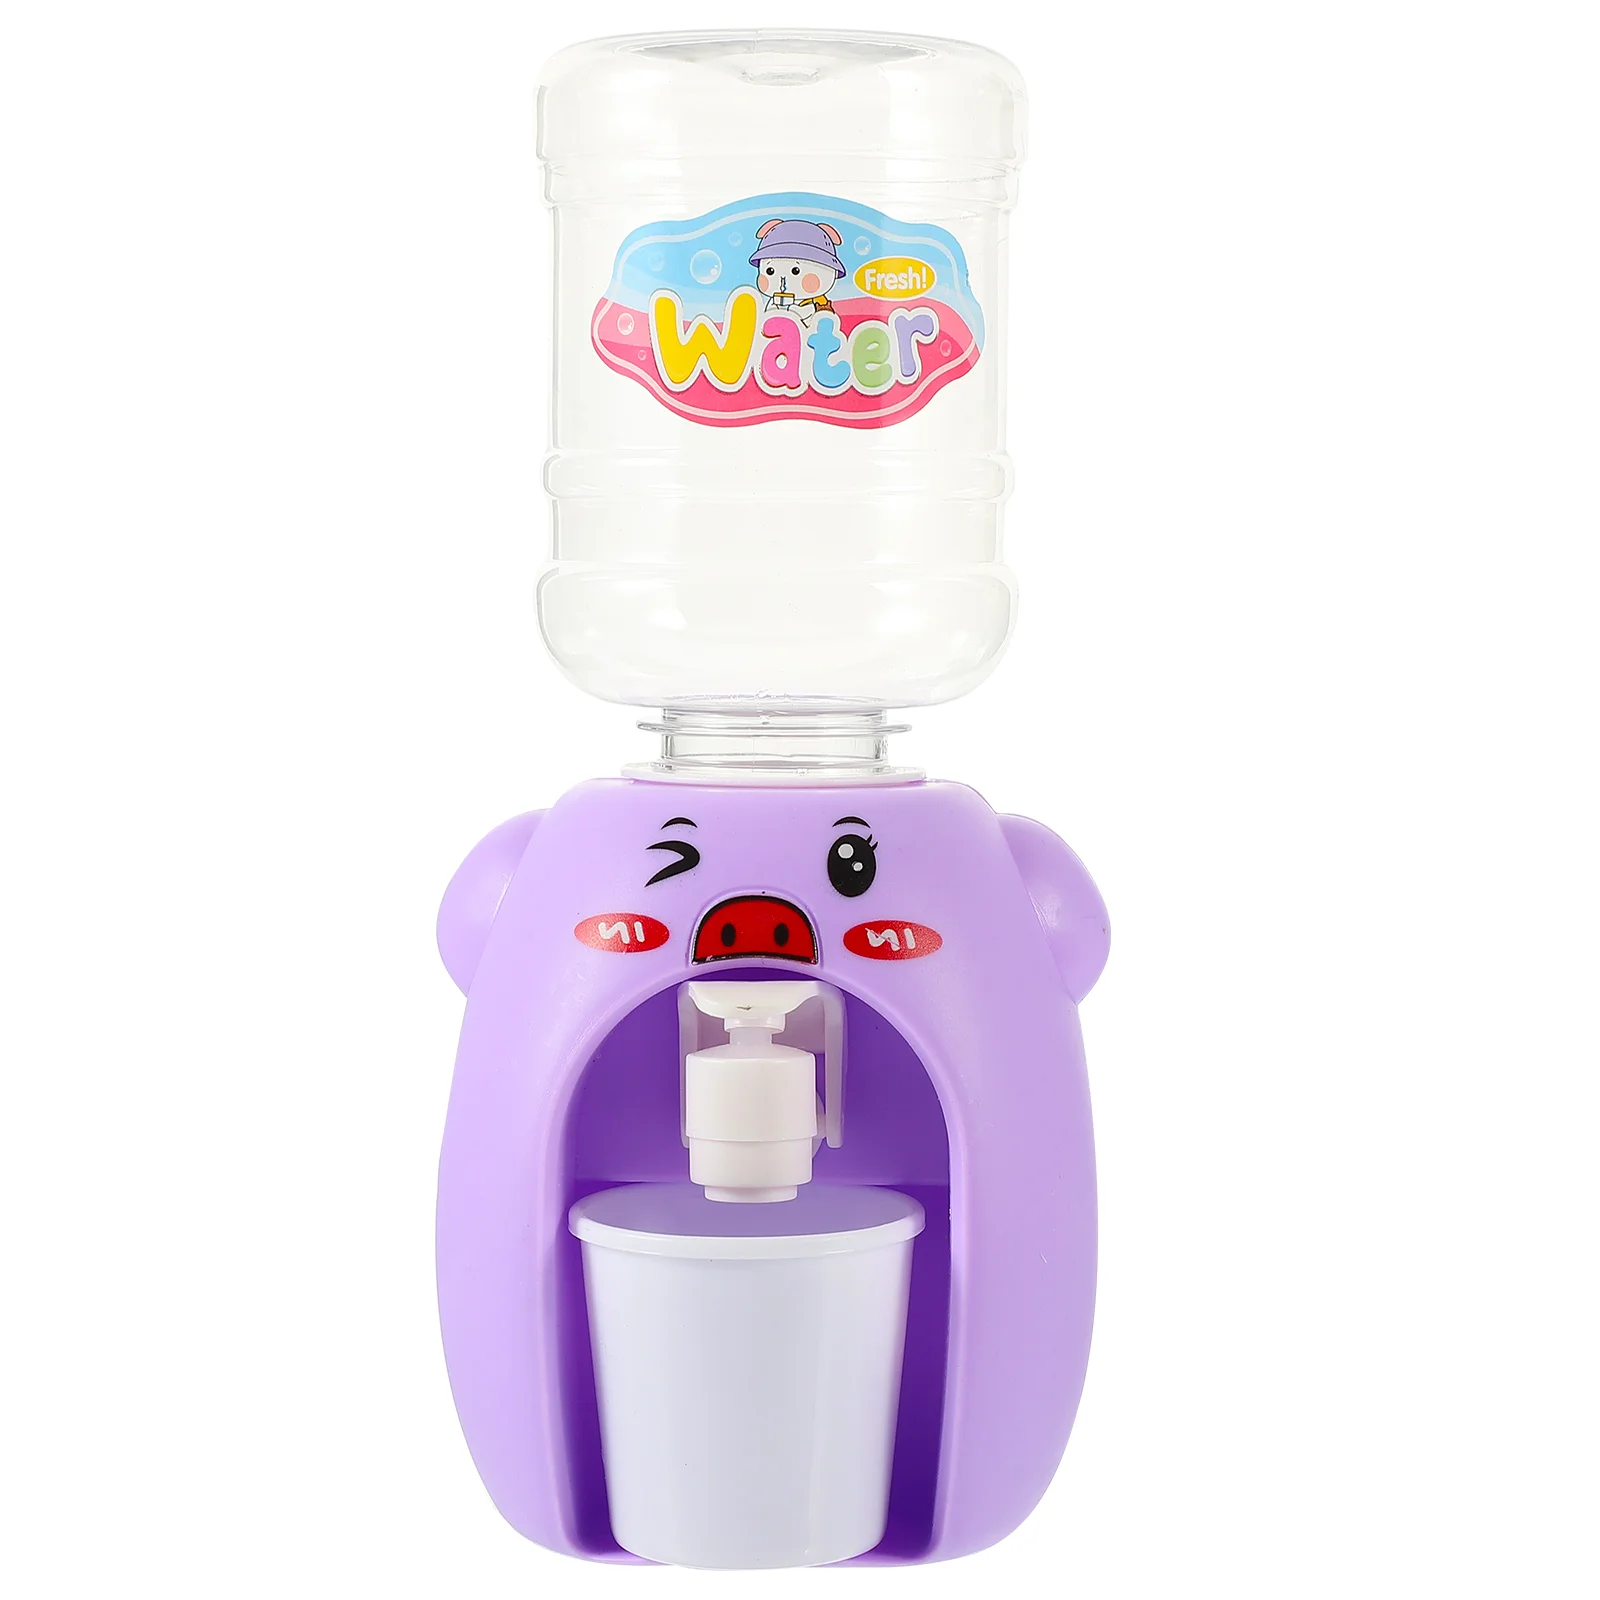 

Miniature Toys Kids Gift Water Dispensers Fountain Puzzle Educational Home Scene Appliance Purple Lovely Drinking Pretend Child